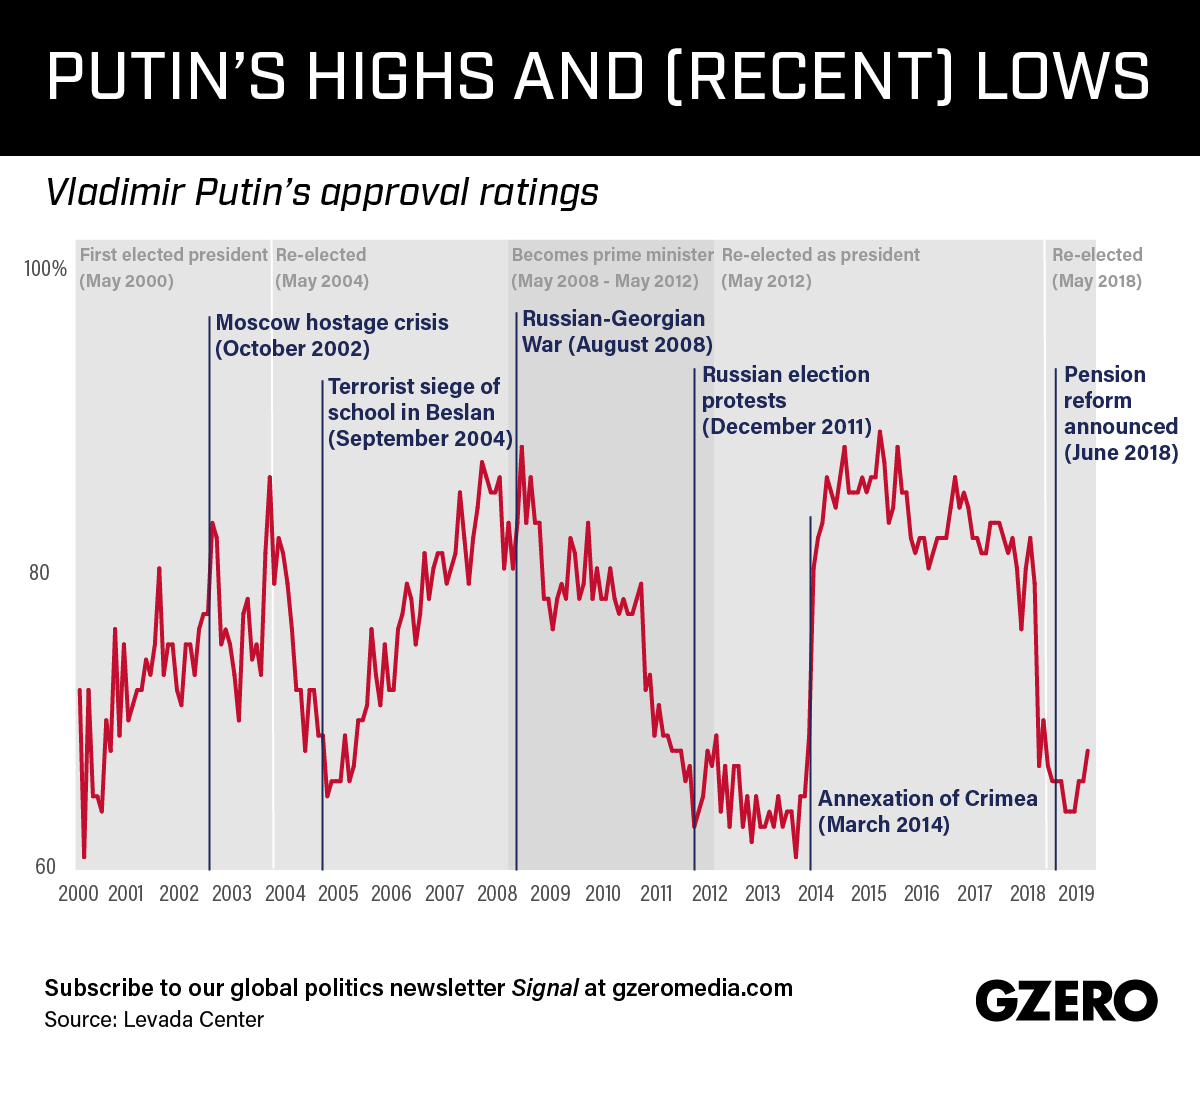 Graphic Truth: Putin's Highs and (Recent) Lows